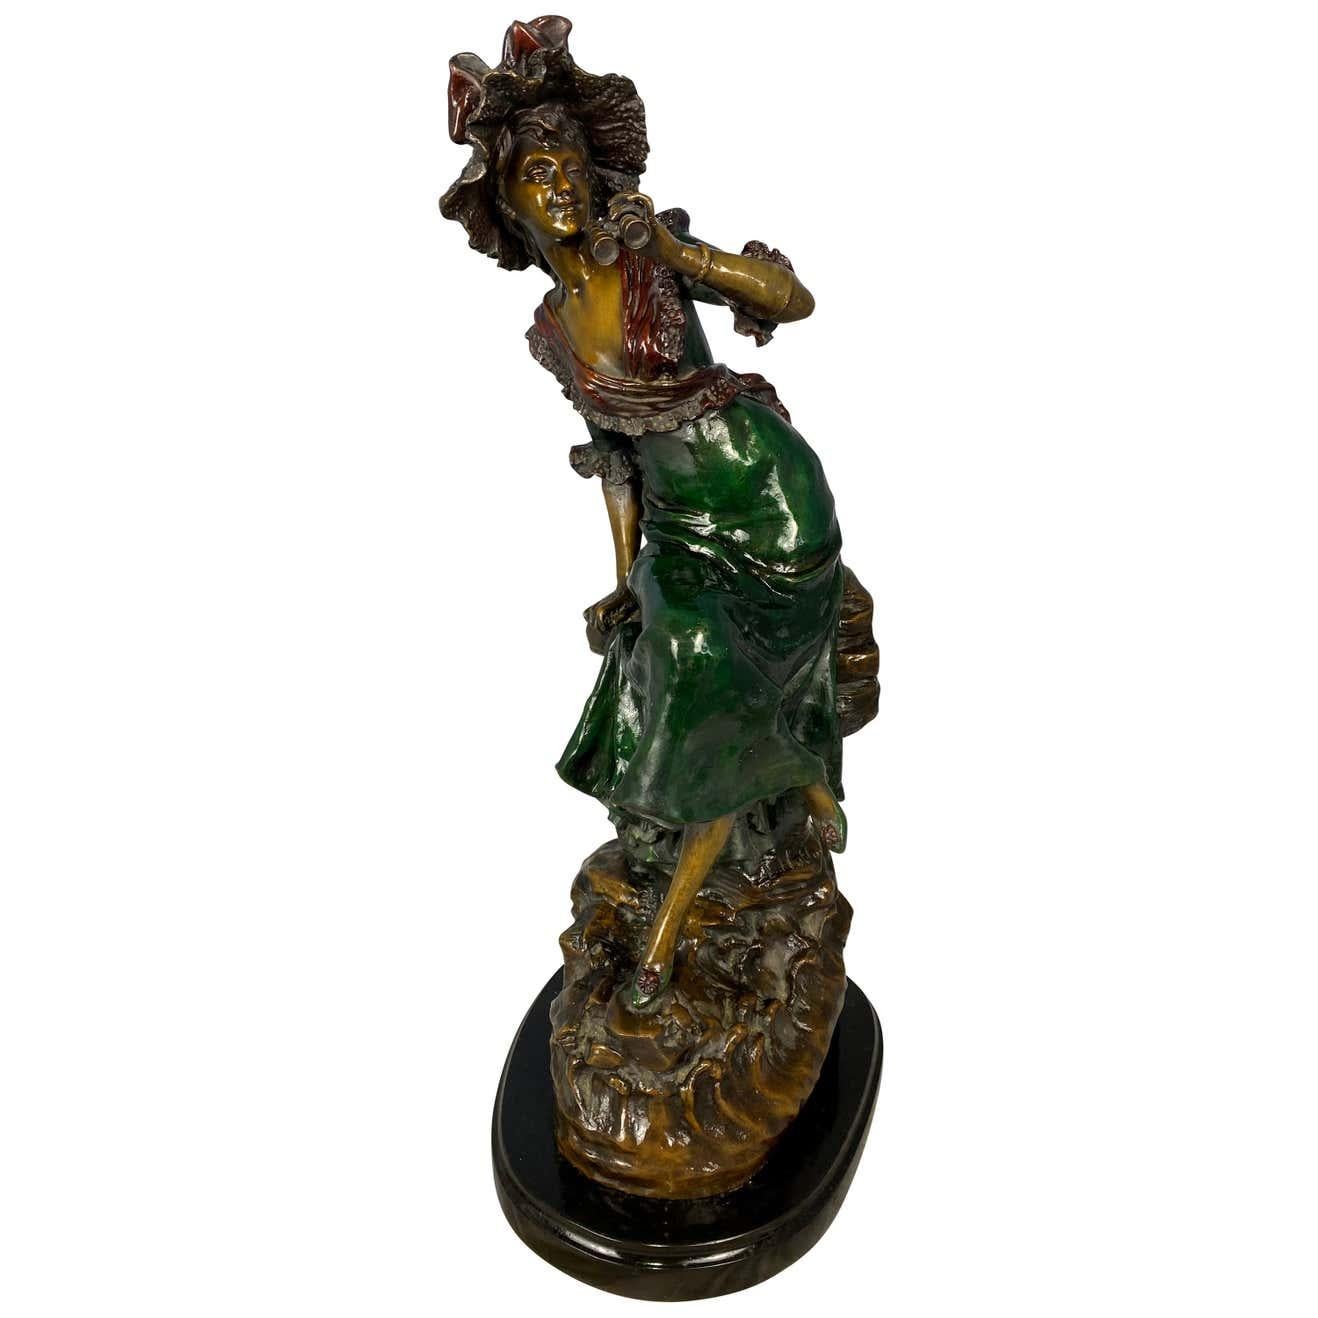 A fine 20th century statue of a two-tone patina bronze woman dressed in Classic Victorian clothing, holding a pair of theatre binoculars. Signed by the French artist Louis Hottot beneath the green dress.